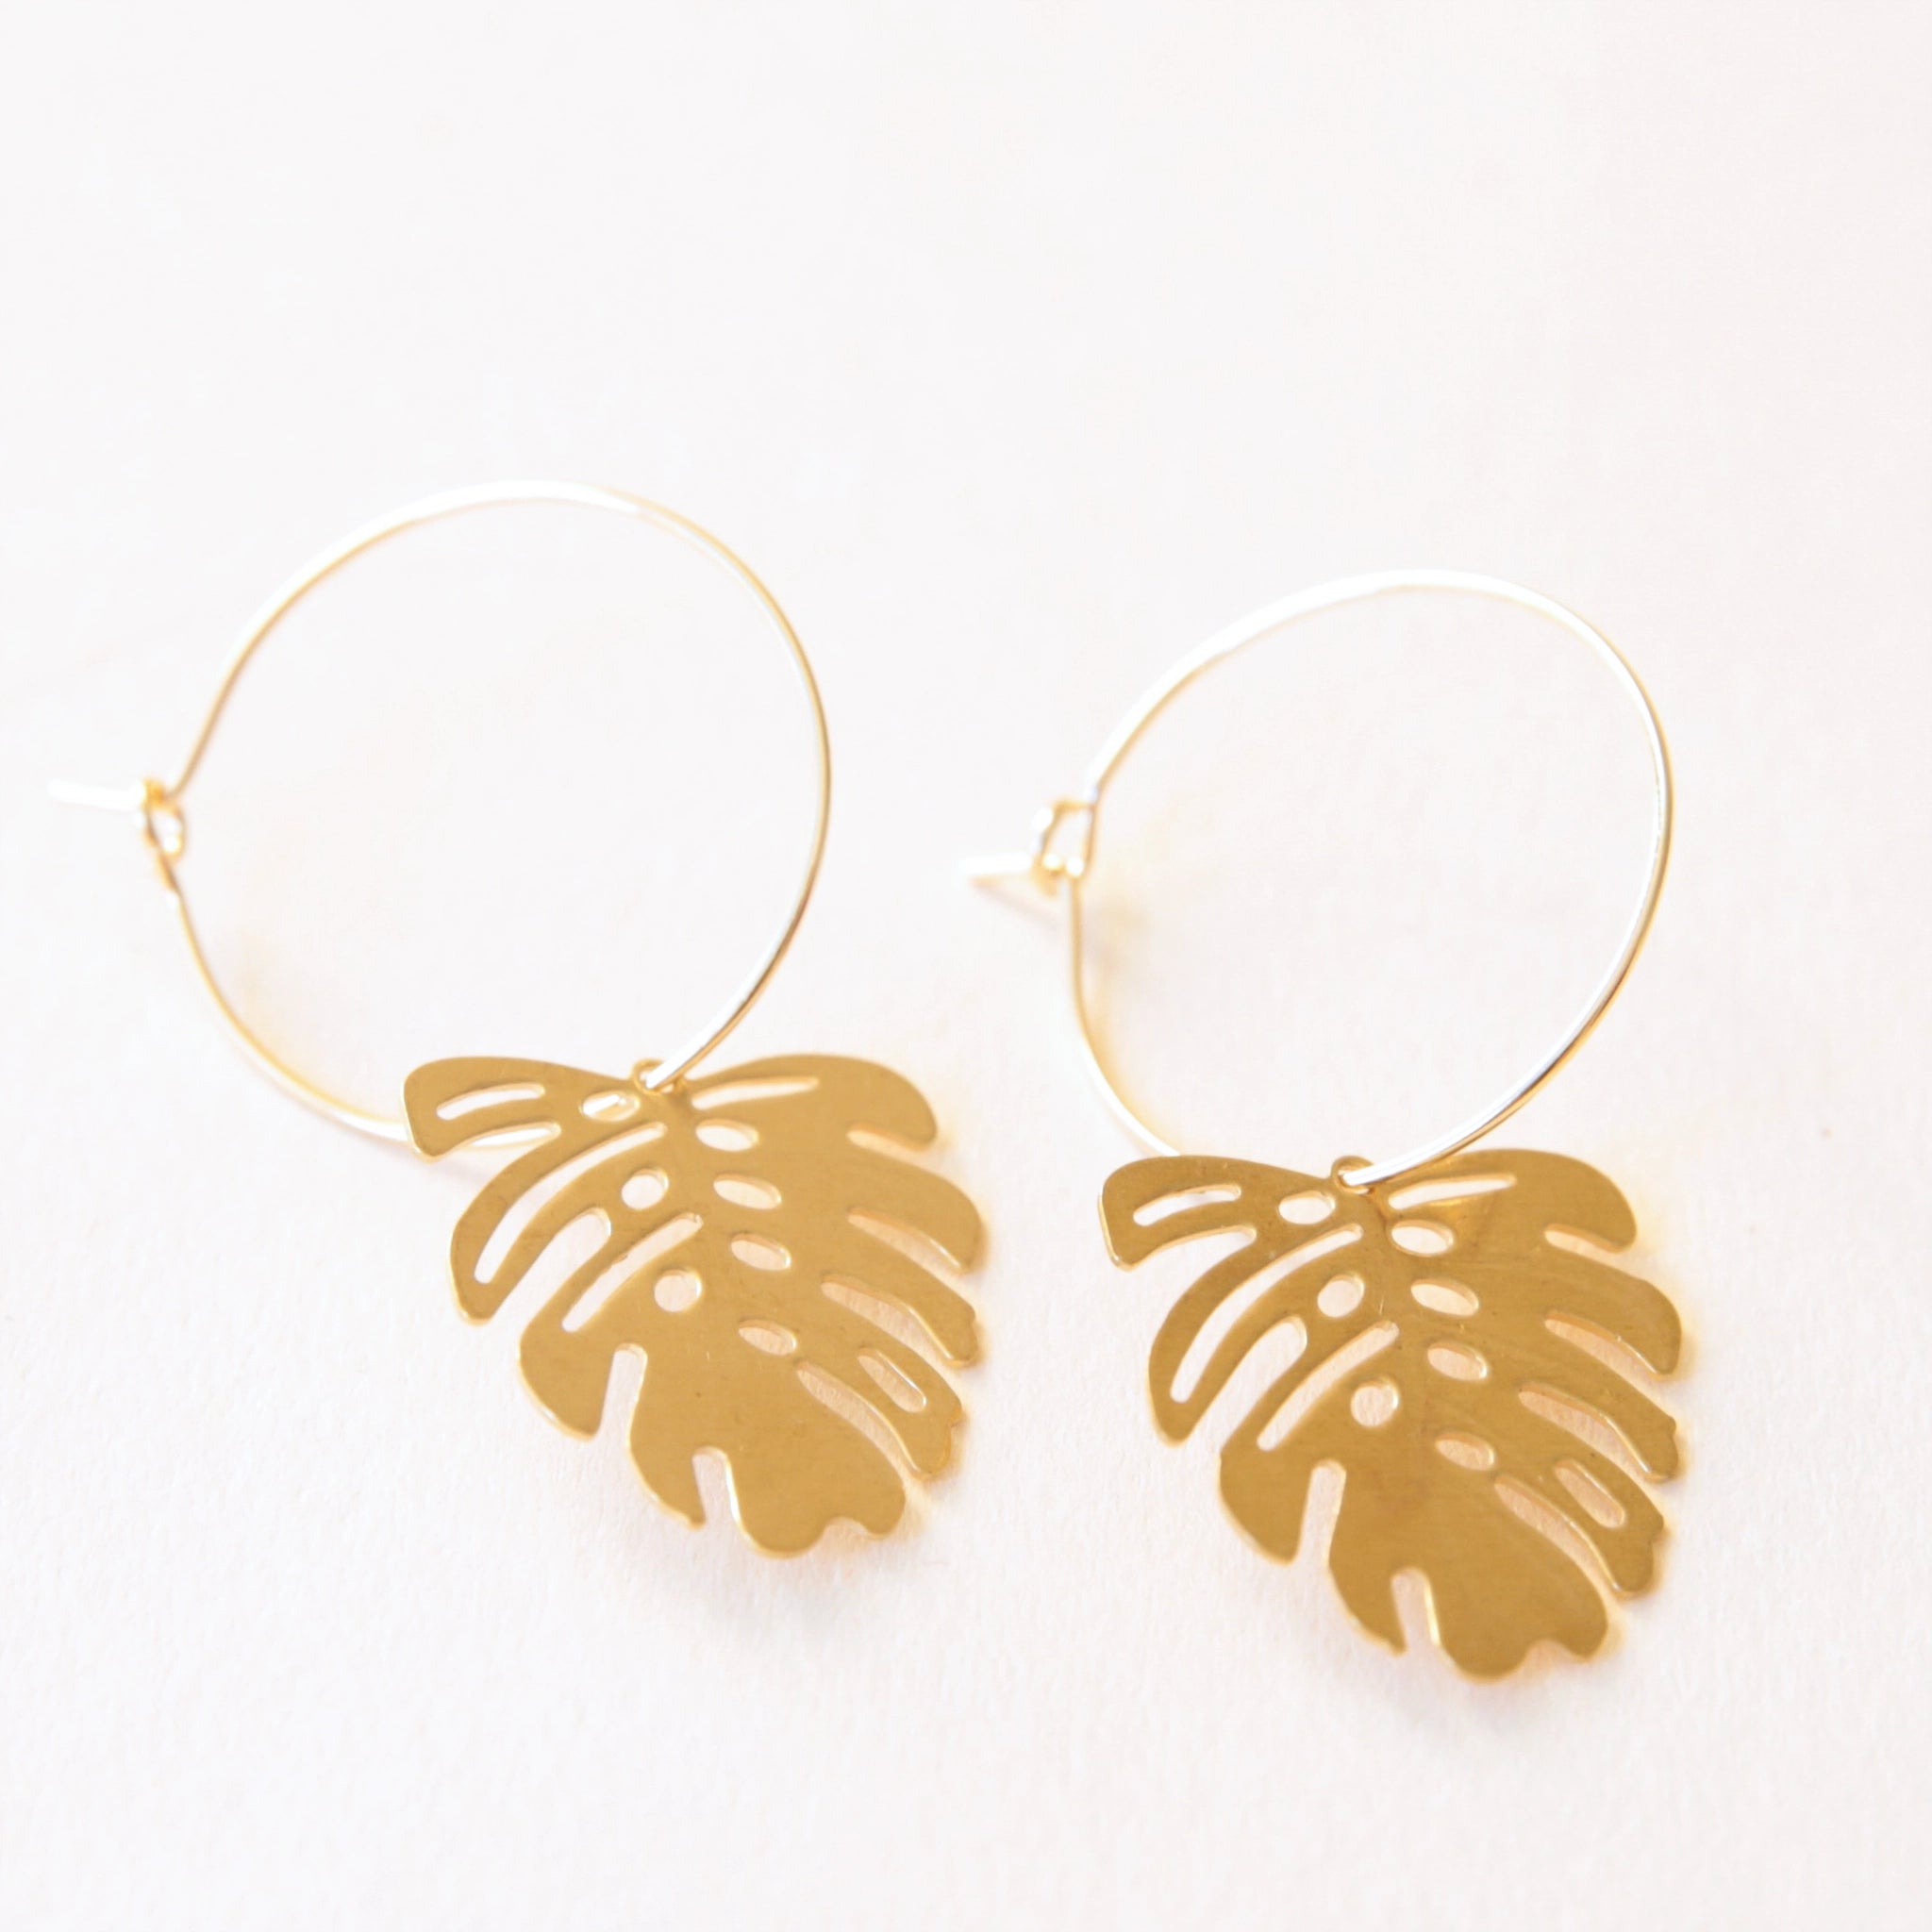 A thin gold hoop with a outlined gold monstera leaf charm hanging from the hoop.